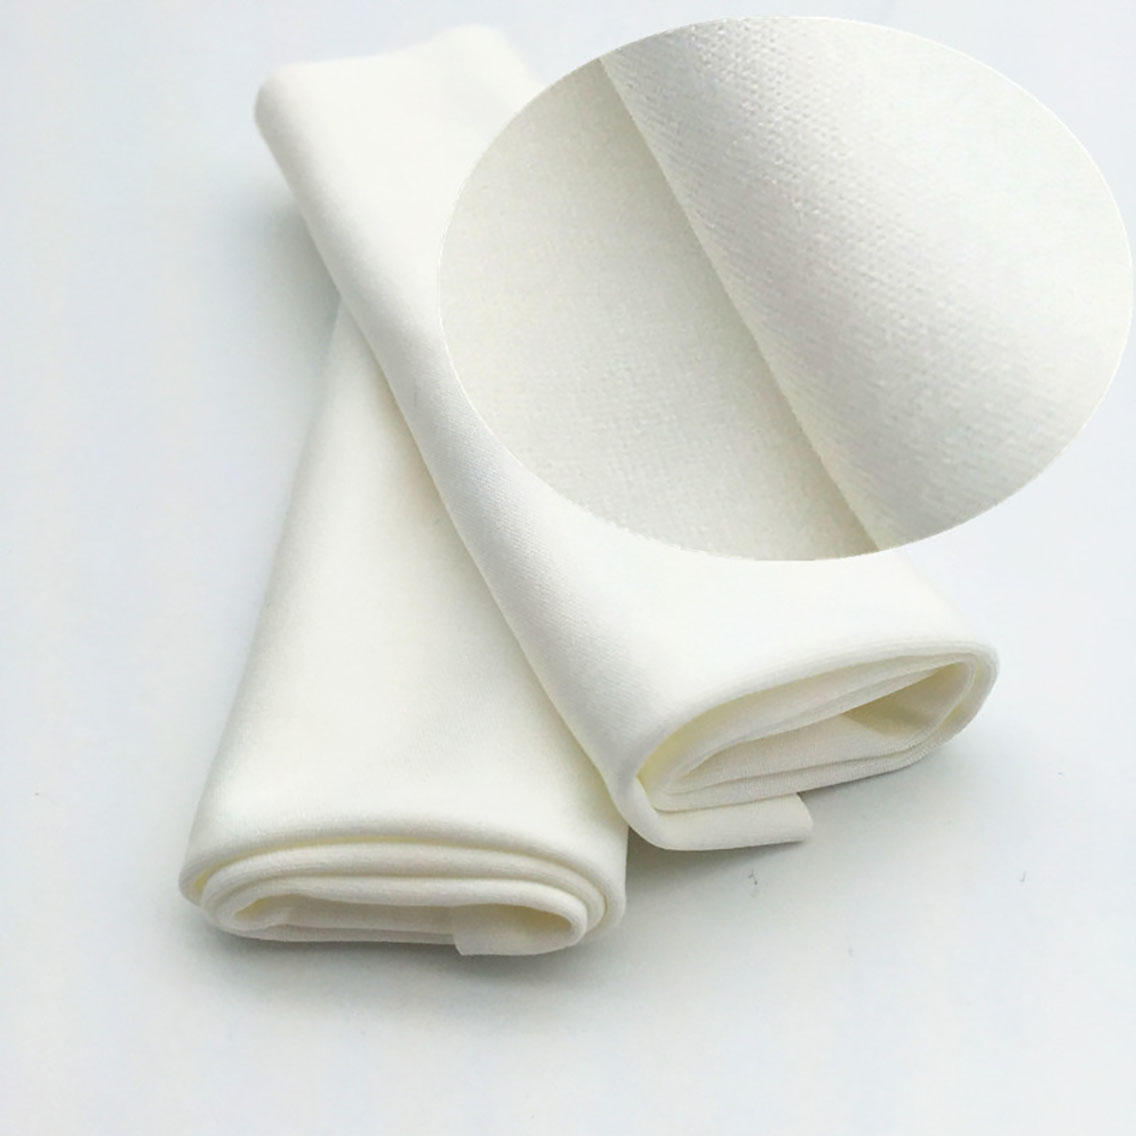 Cleanmo 30% nylon lens wipes supplier for medical device products